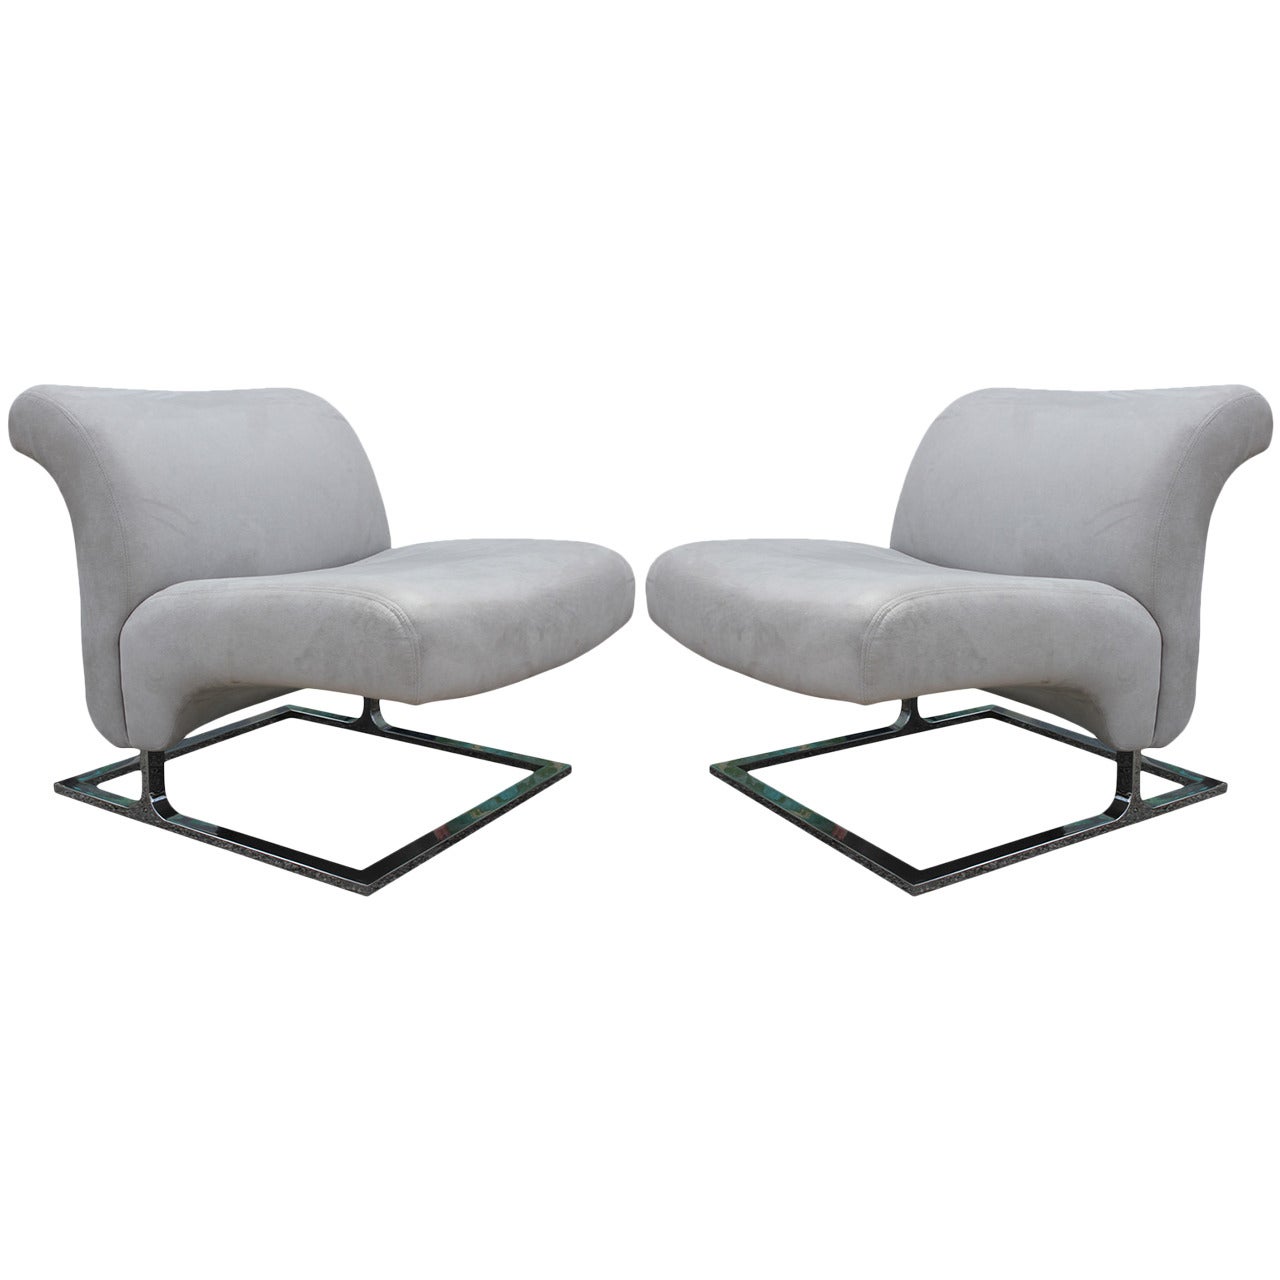 Elegant Chrome and Grey Suede Cantilevered Lounge Chairs Saporiti Style